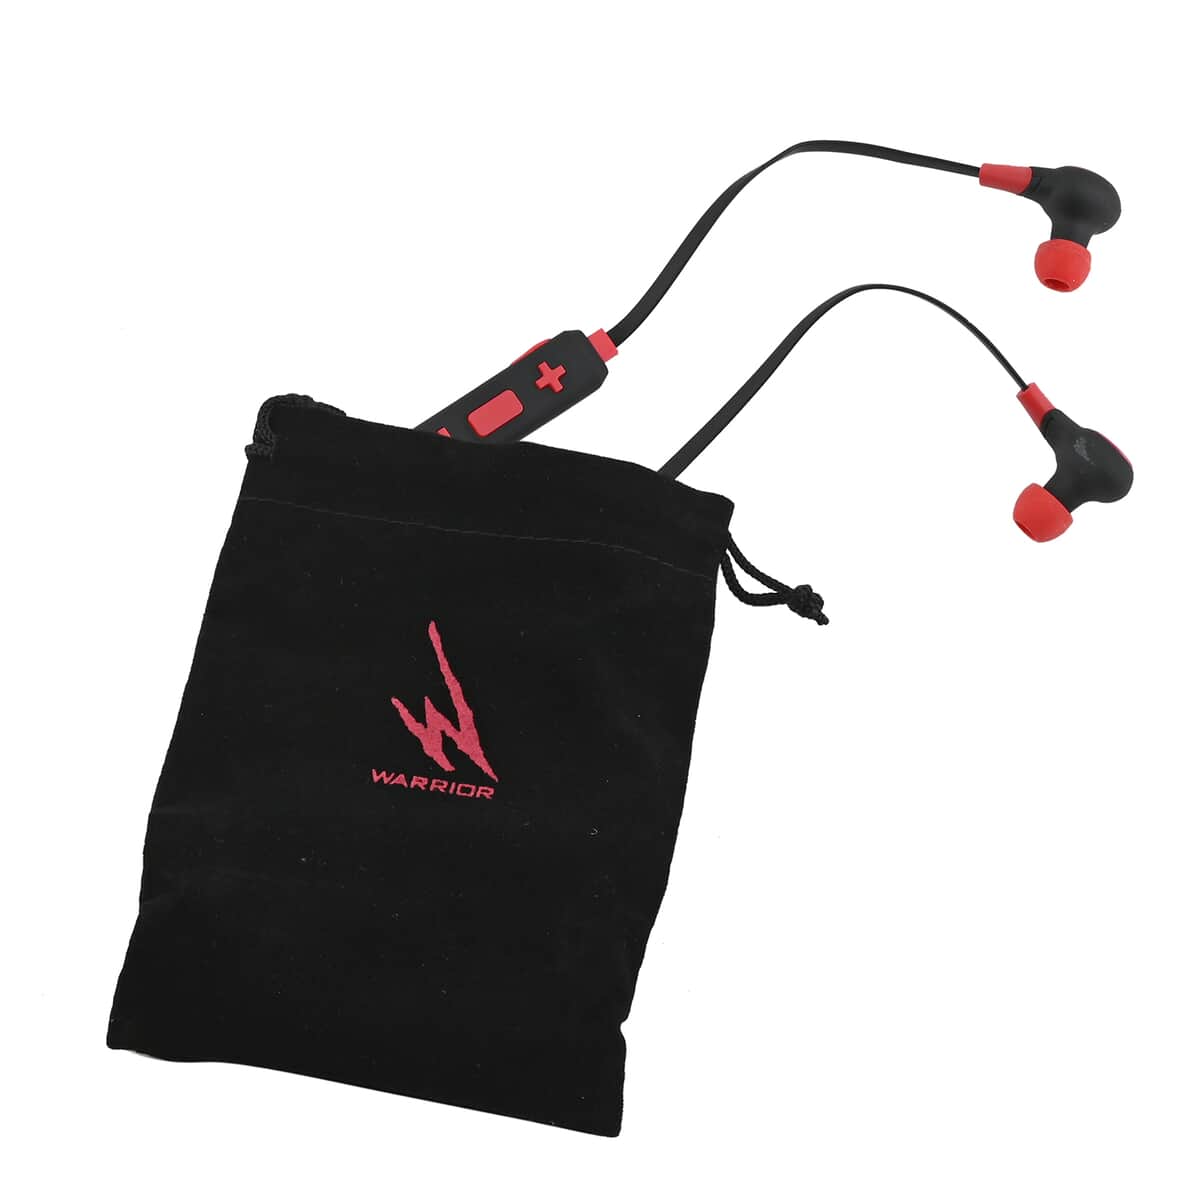 iHip Warrior Red and Black Bluetooth Sport Earbuds, Best Workout Earbuds For Running, Foldable Earbuds image number 5